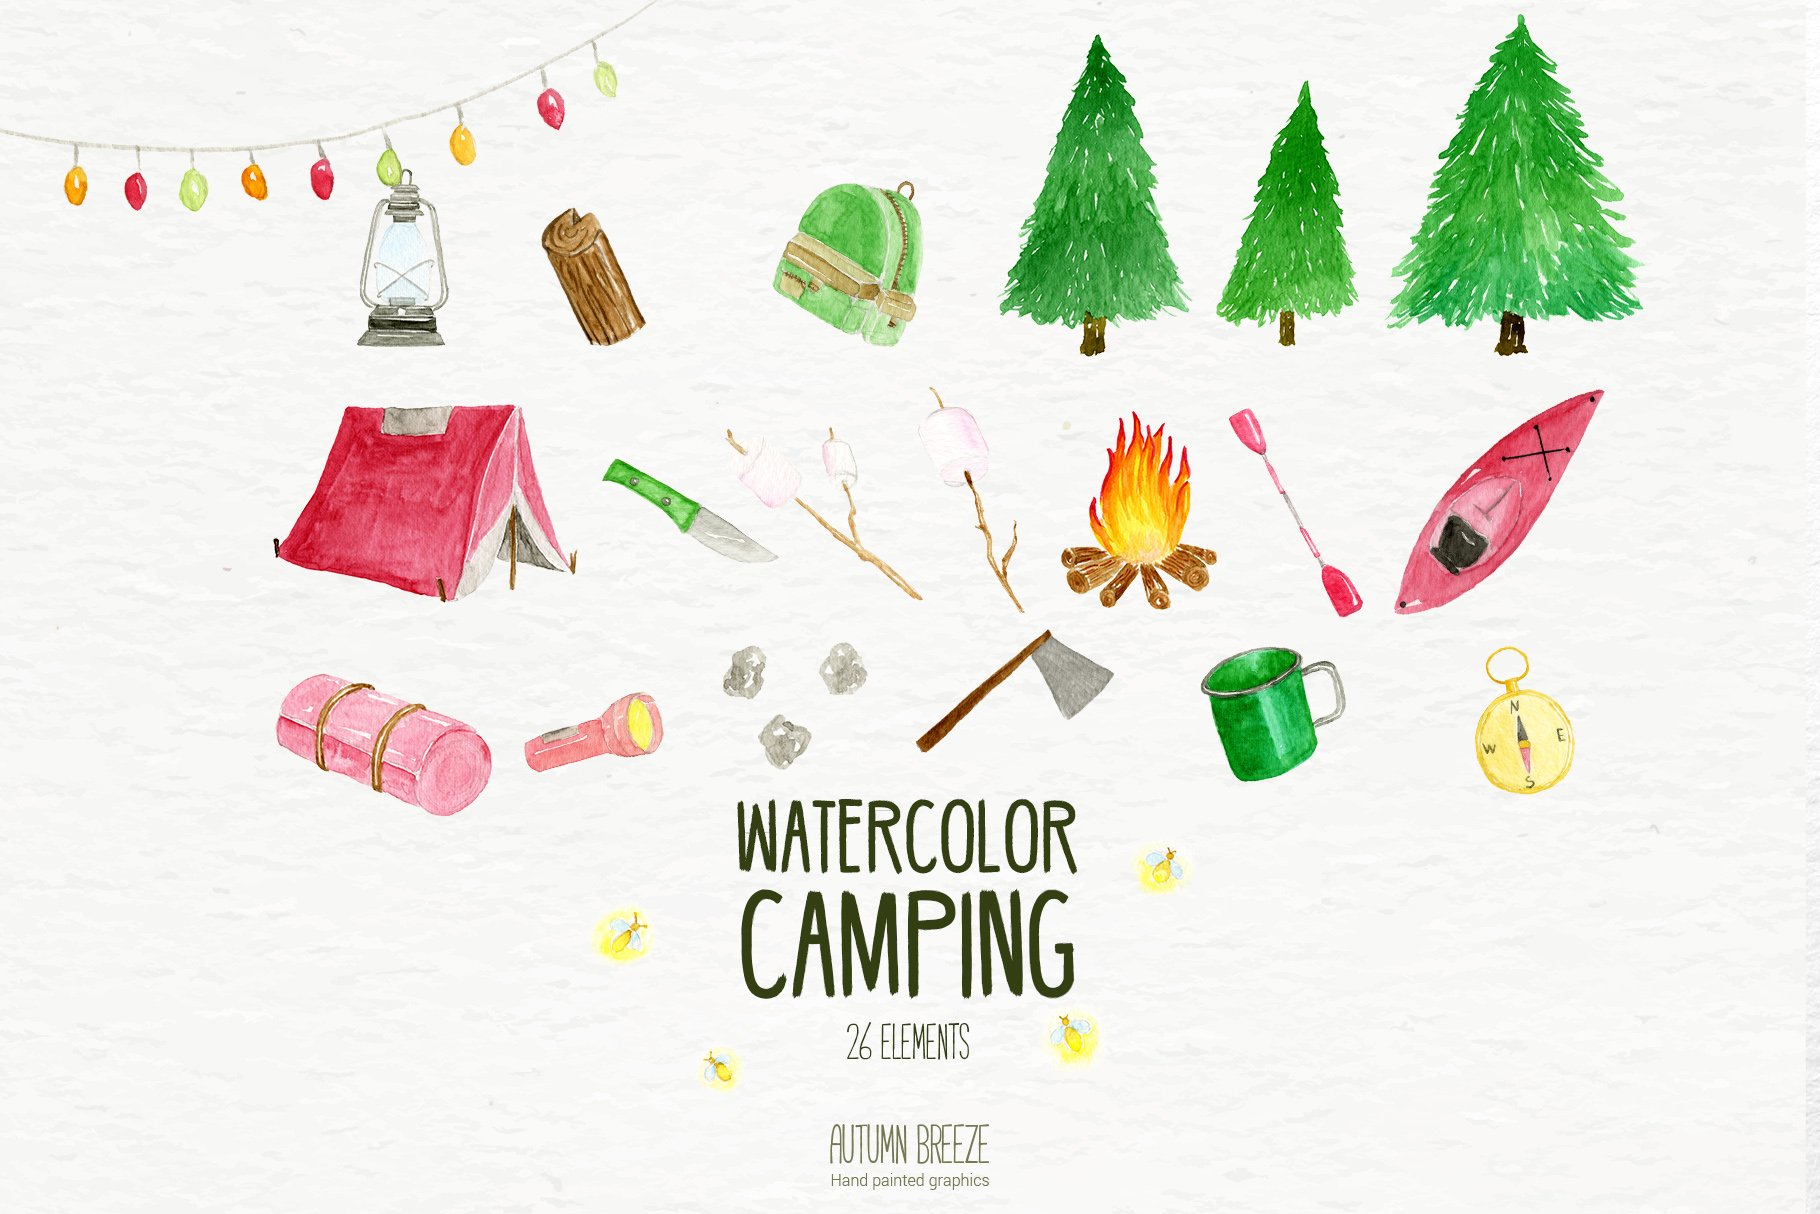 Watercolor colorful elements for camping illustration.